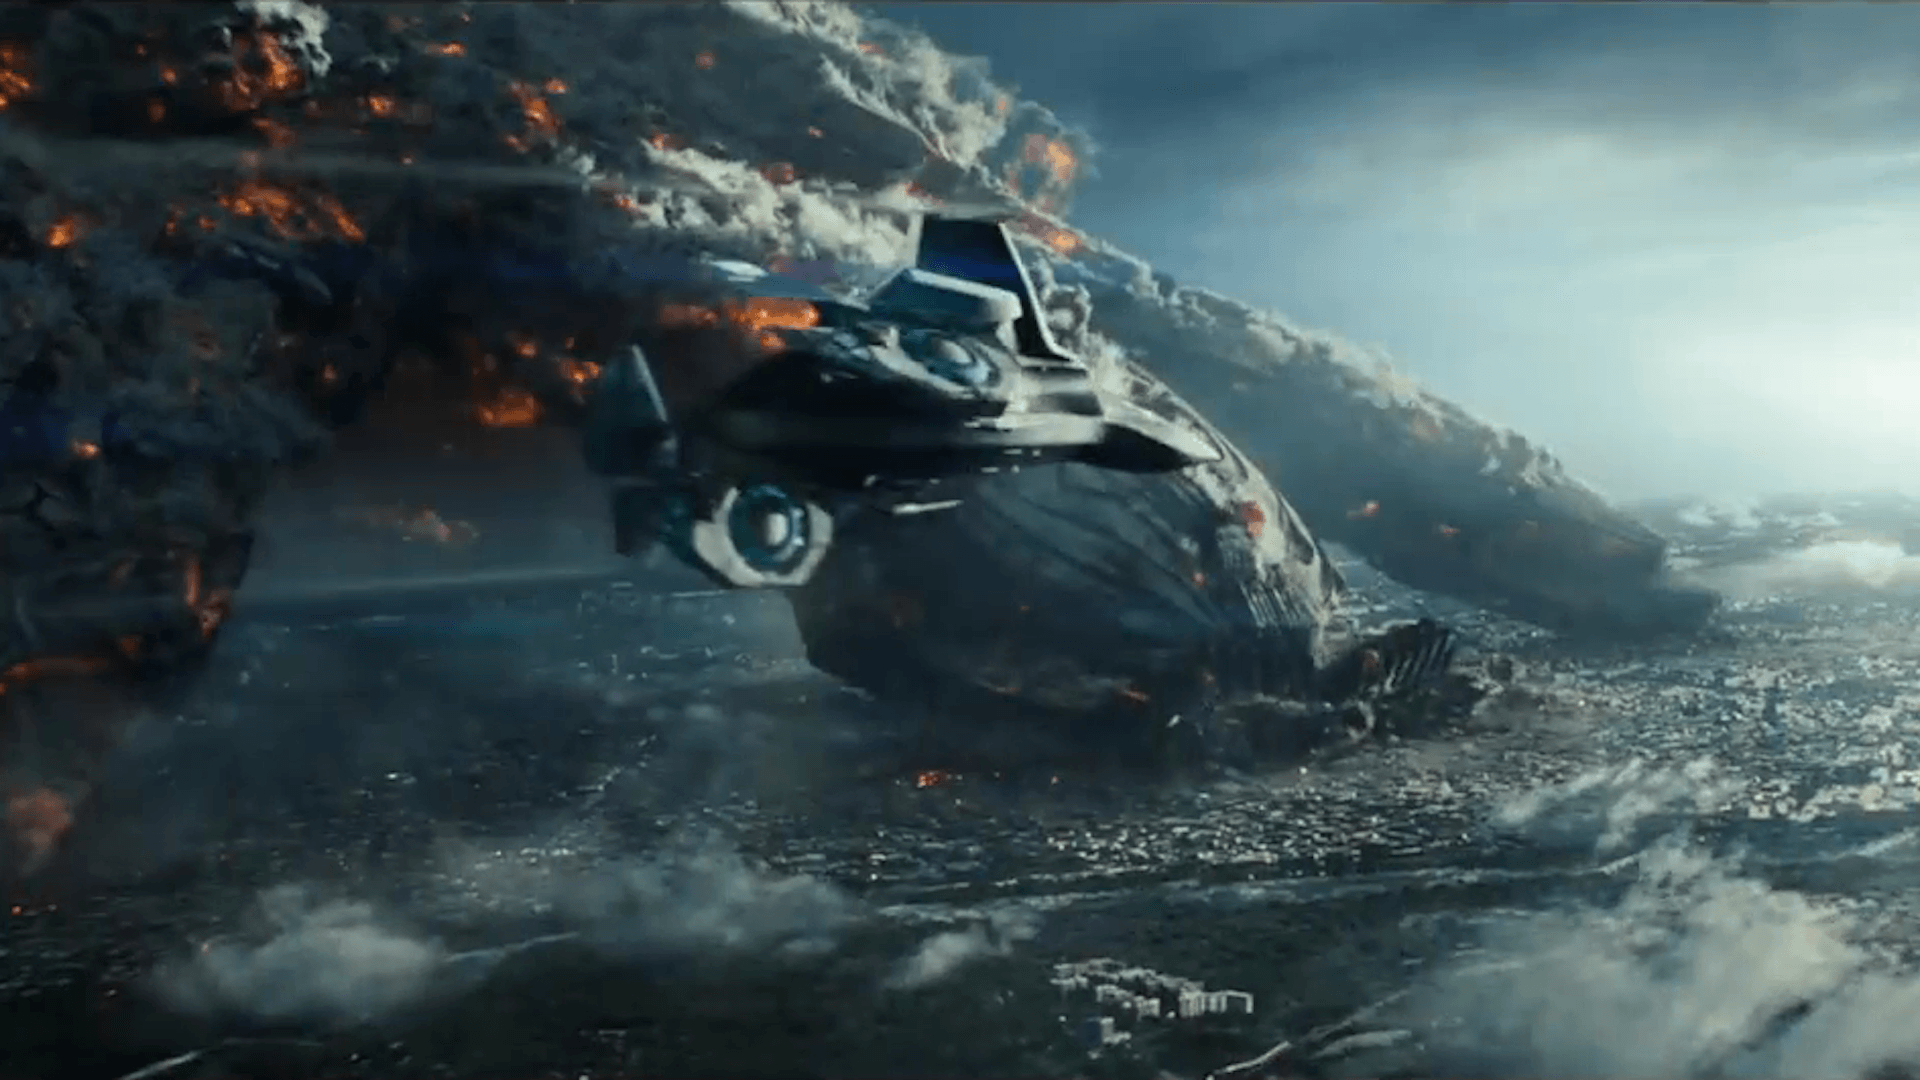 Meet The Real Star Of Independence Day: Resurgence In The Latest